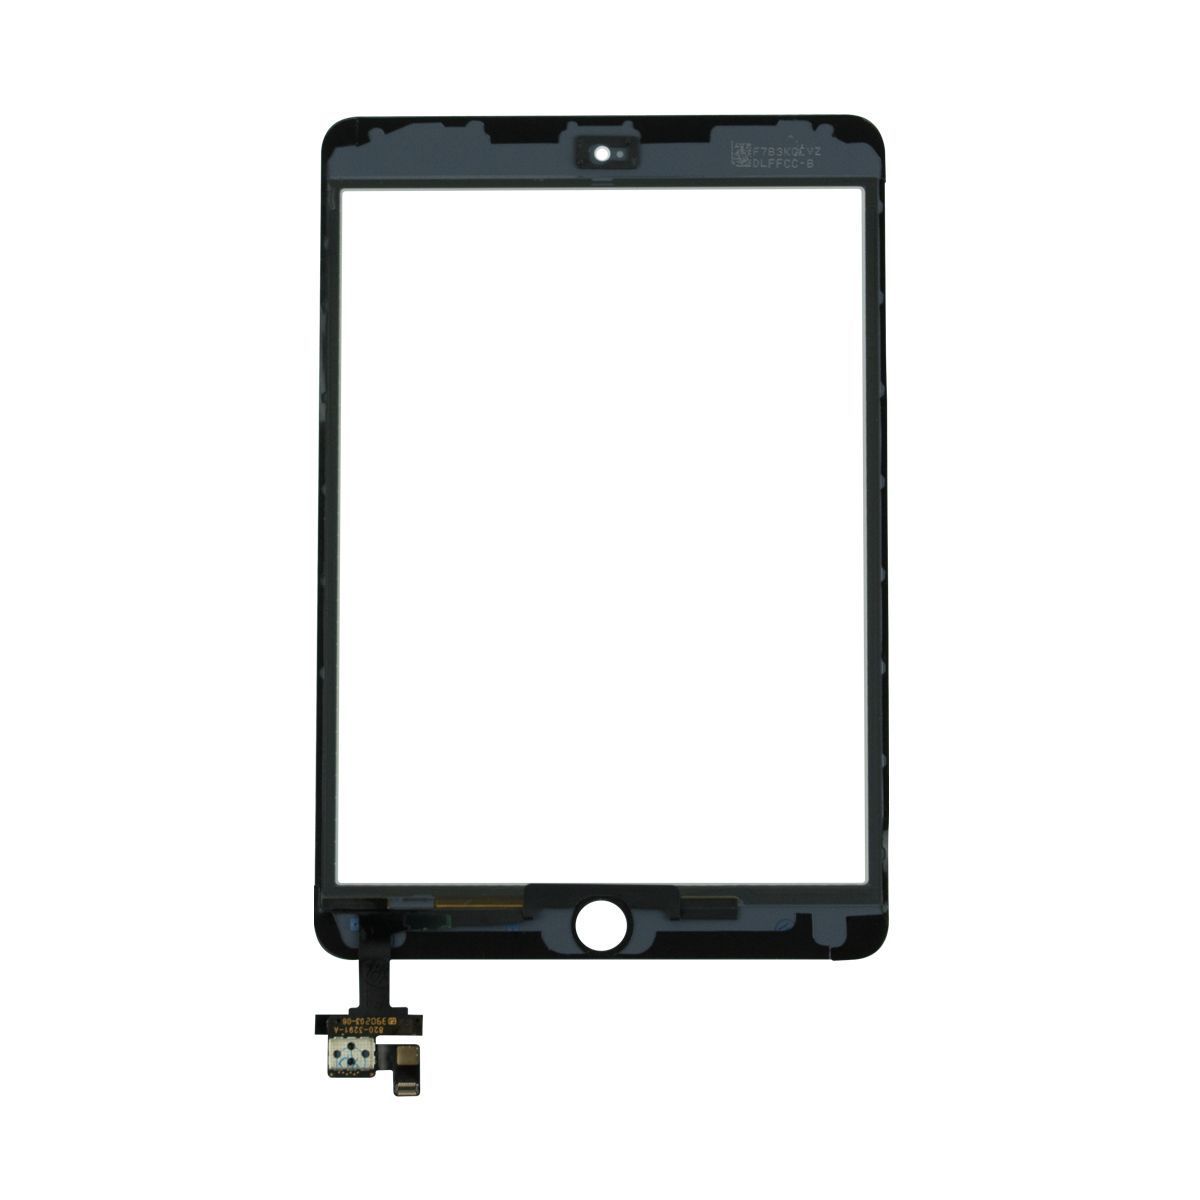 Apple iPad Mini 3 Replacement Touch Screen Assembly - White for [product_price] - First Help Tech